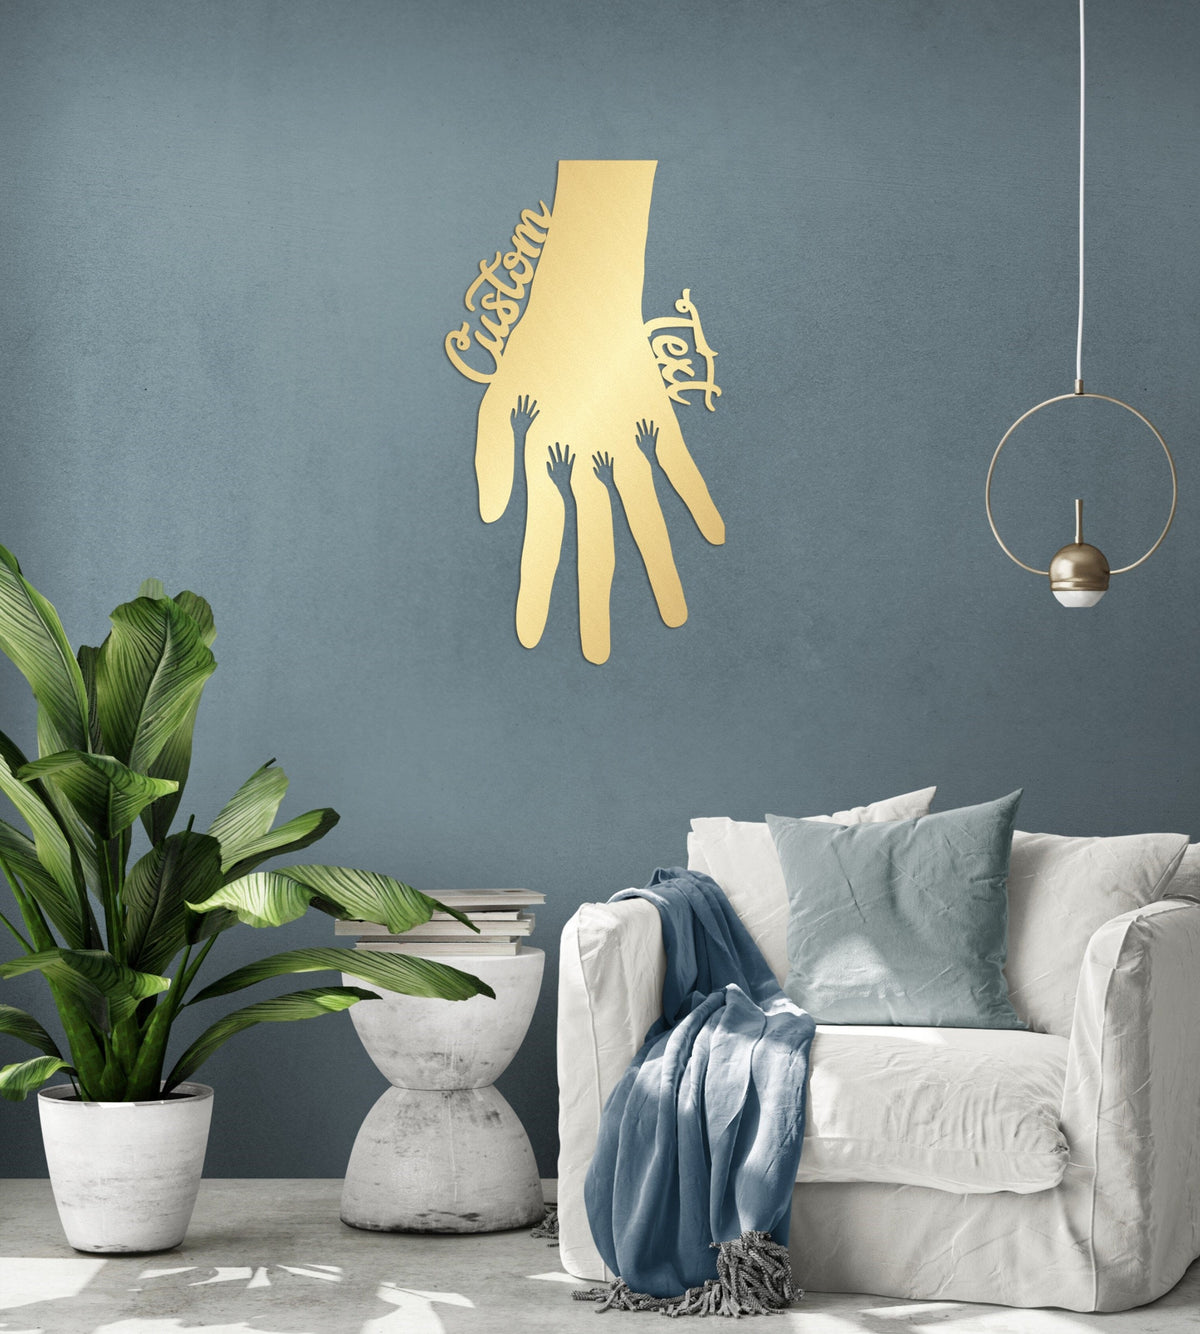 Personalized Metal Hands Wall Art and Customized Decor Gift